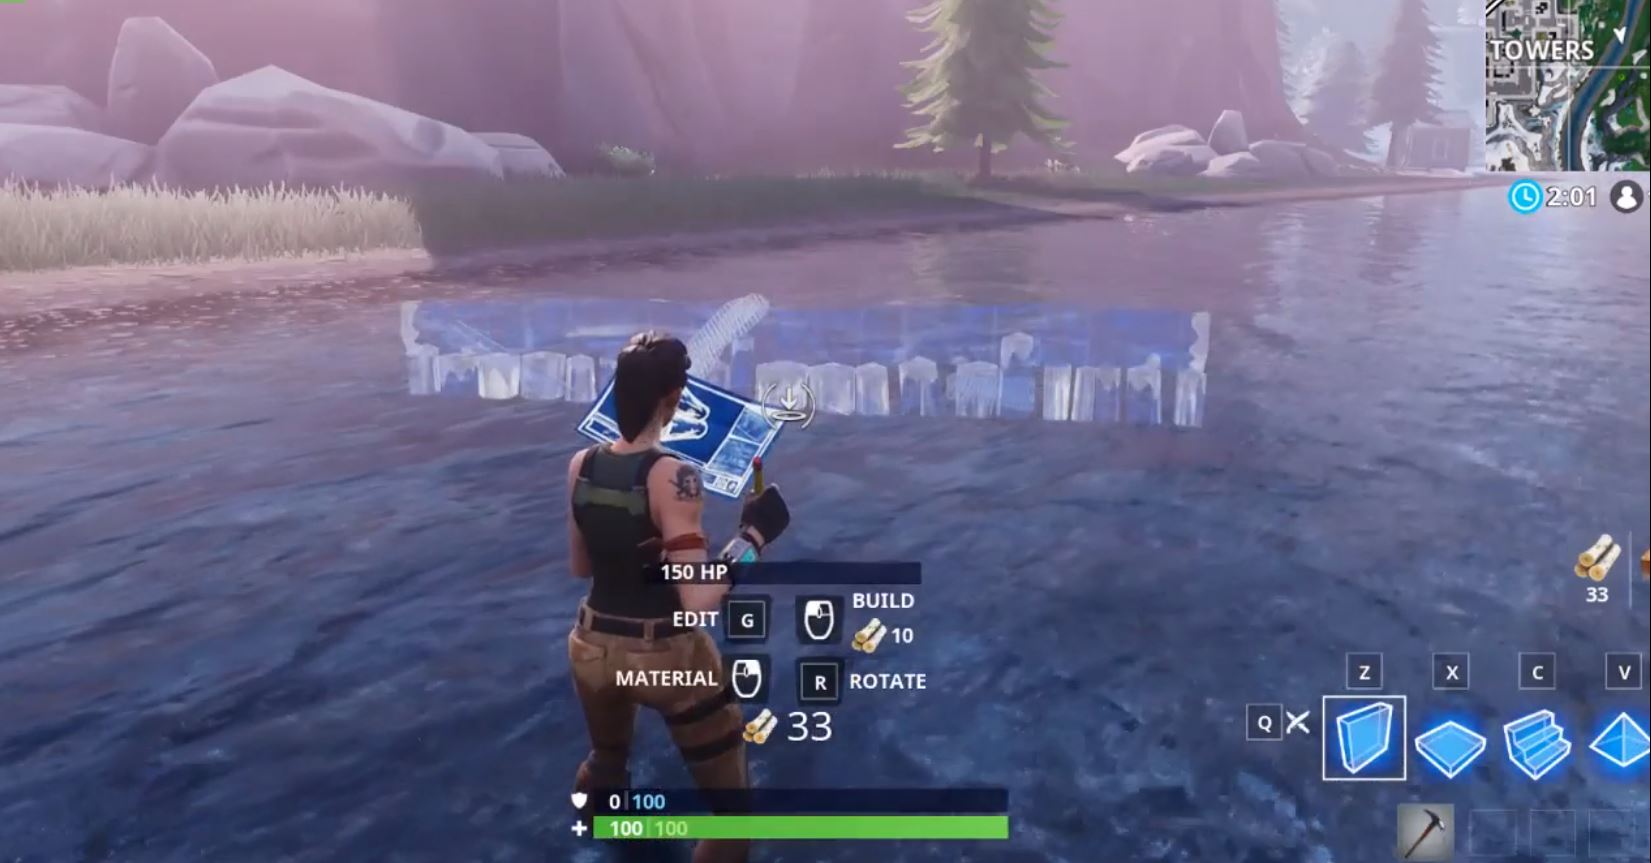 Fortnite Wall Placement Before the v7.20 update